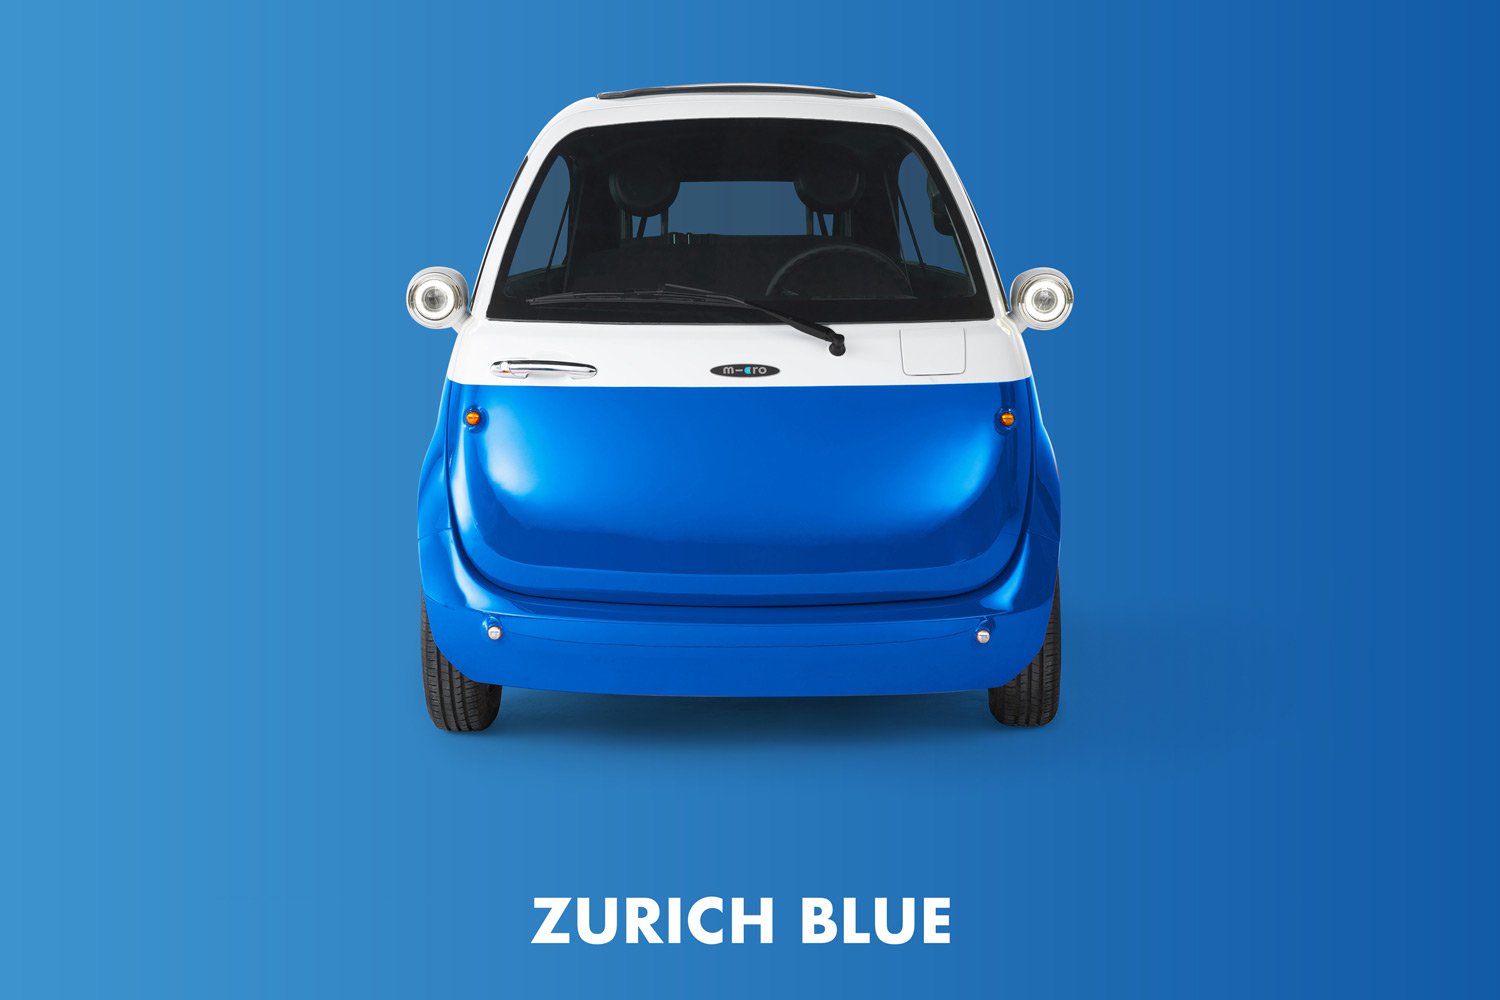 Meet the World's Smallest Electric Car-Microlino Electric Car